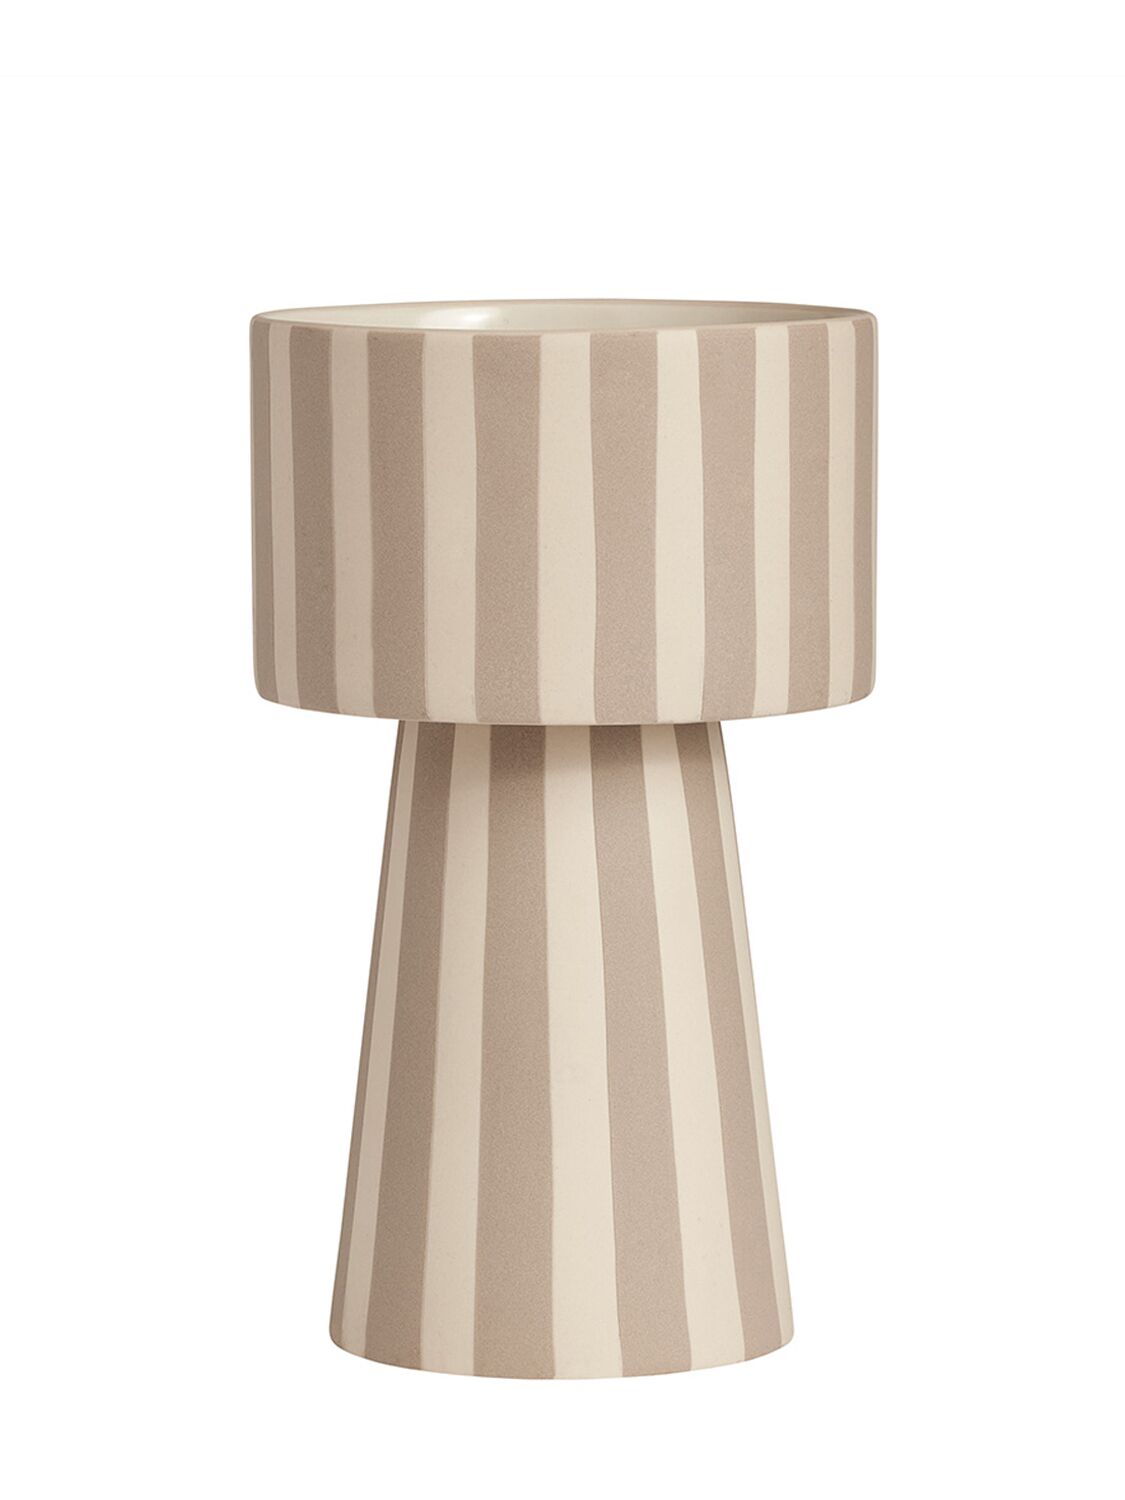 Oyoy Large Toppu Vase In Neutral